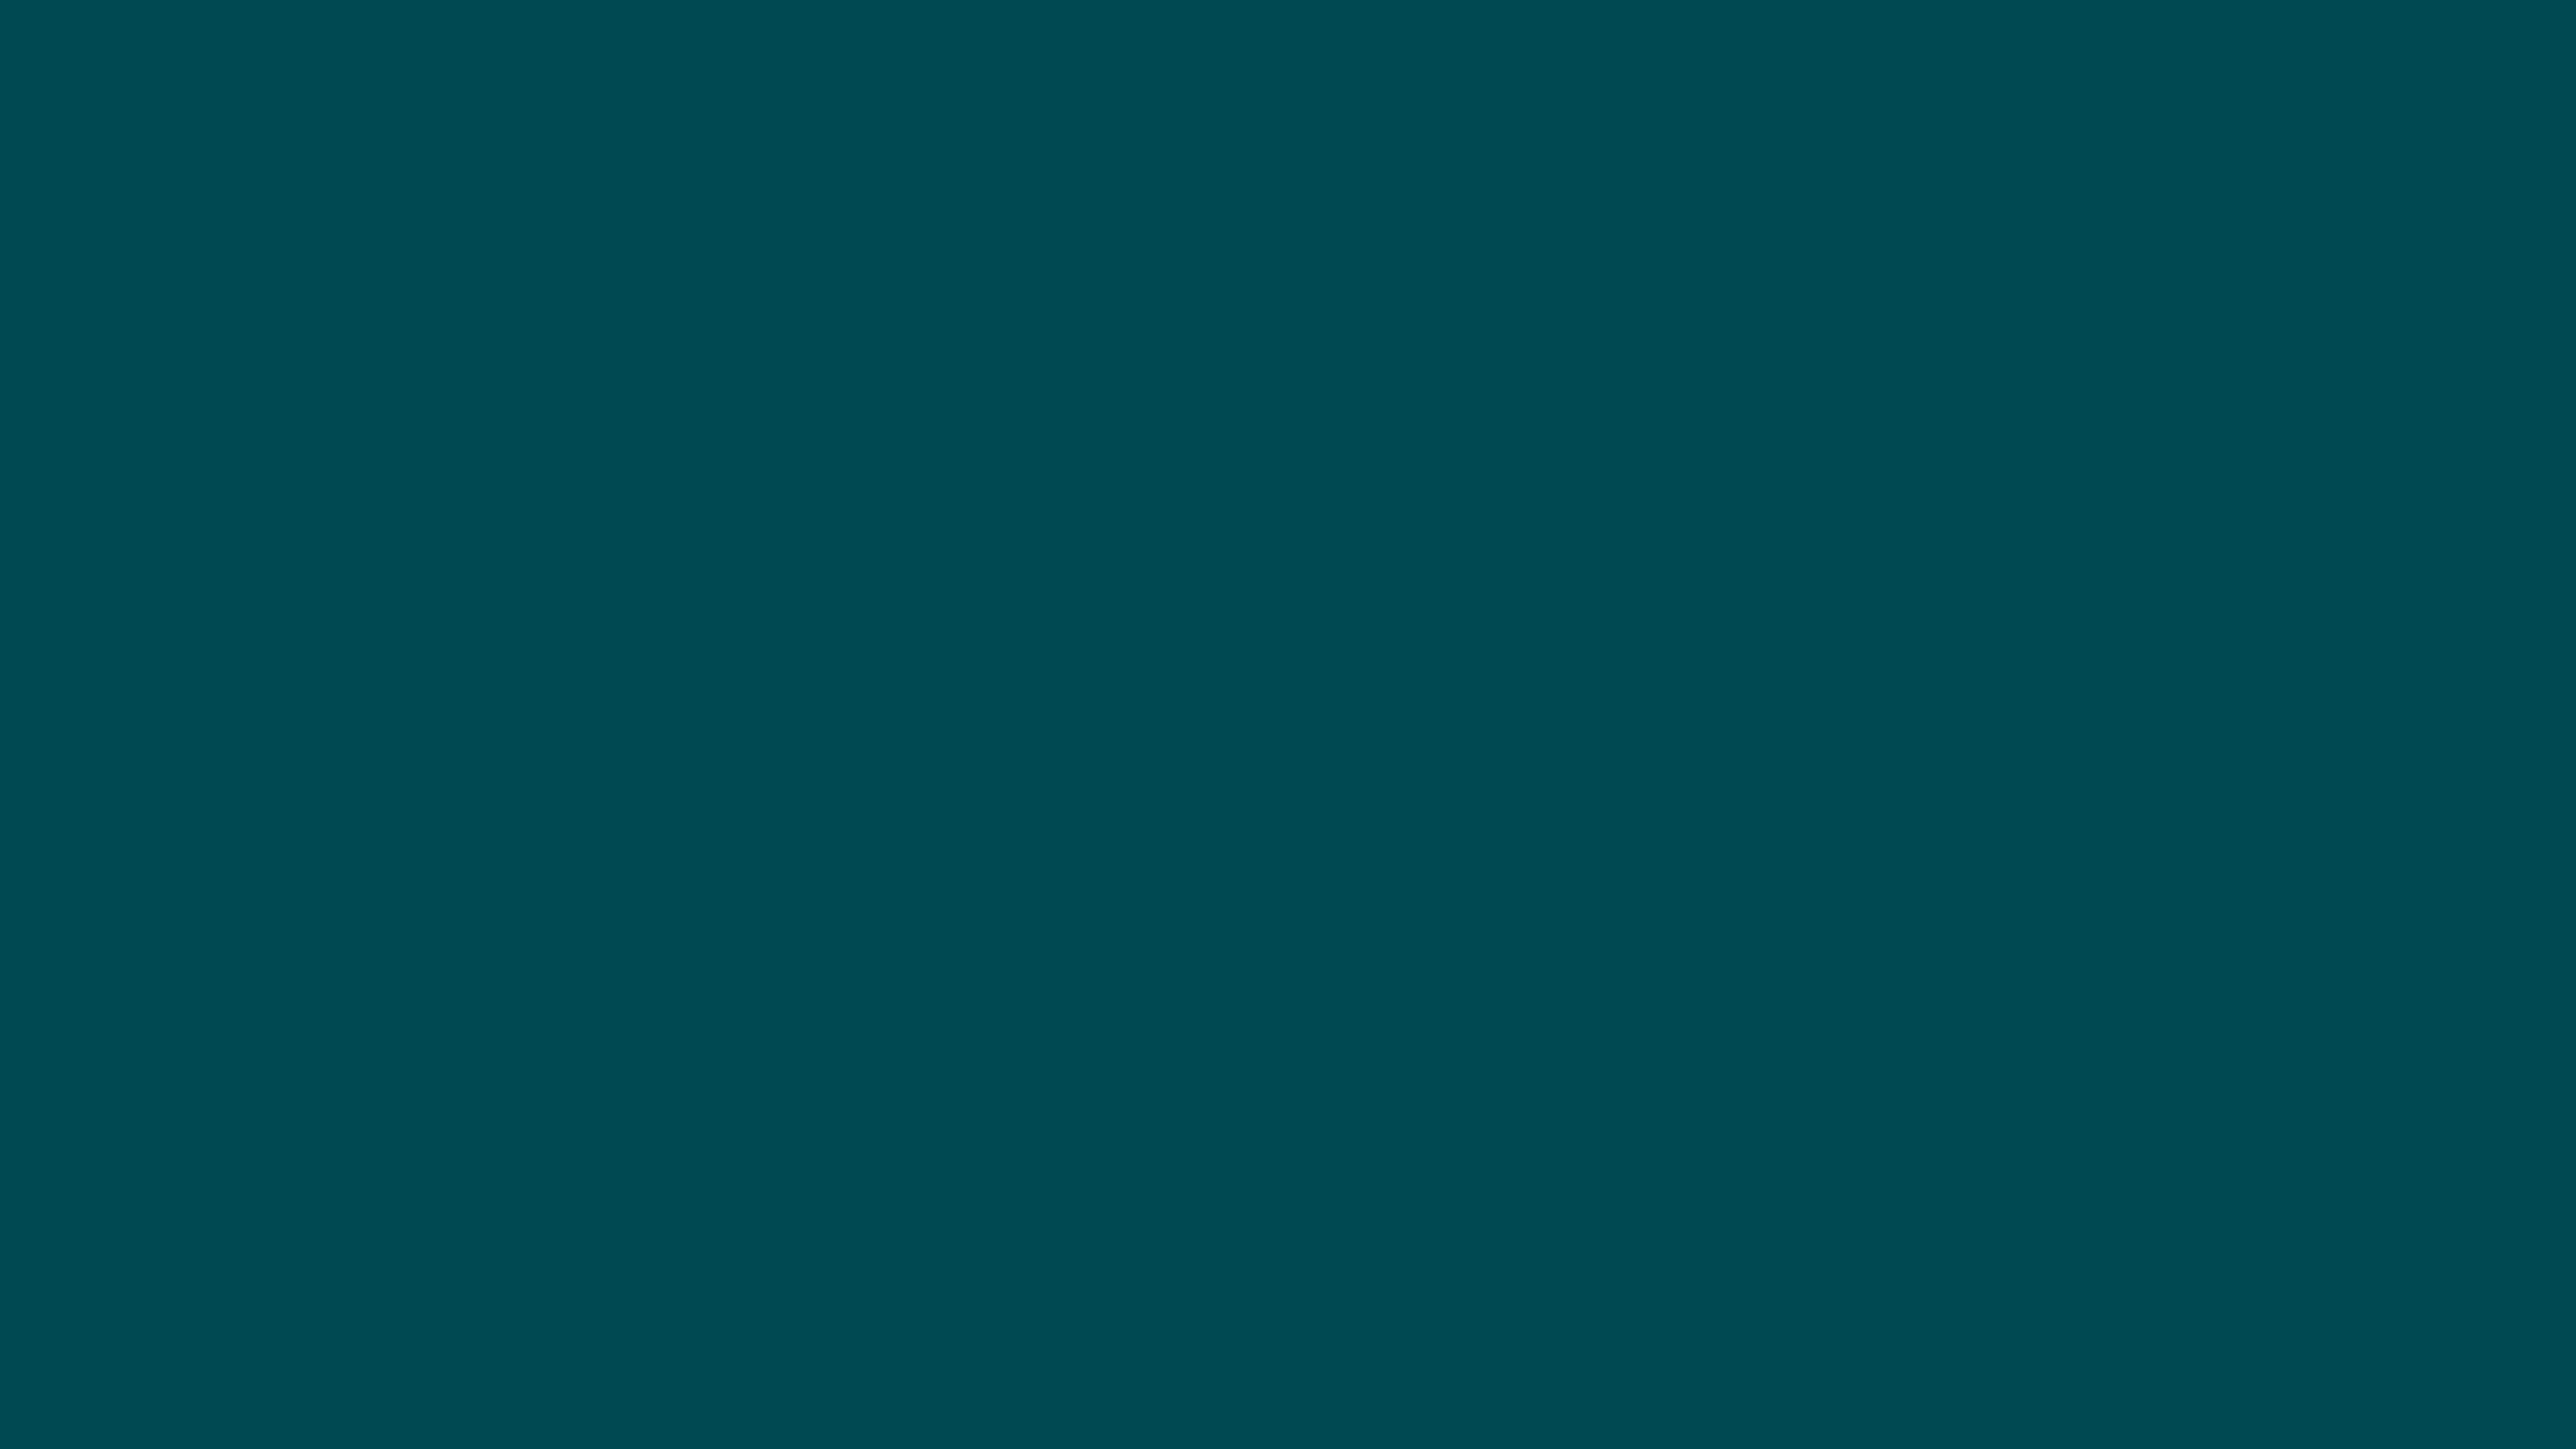 7680x4320 Midnight Green Solid Color Background